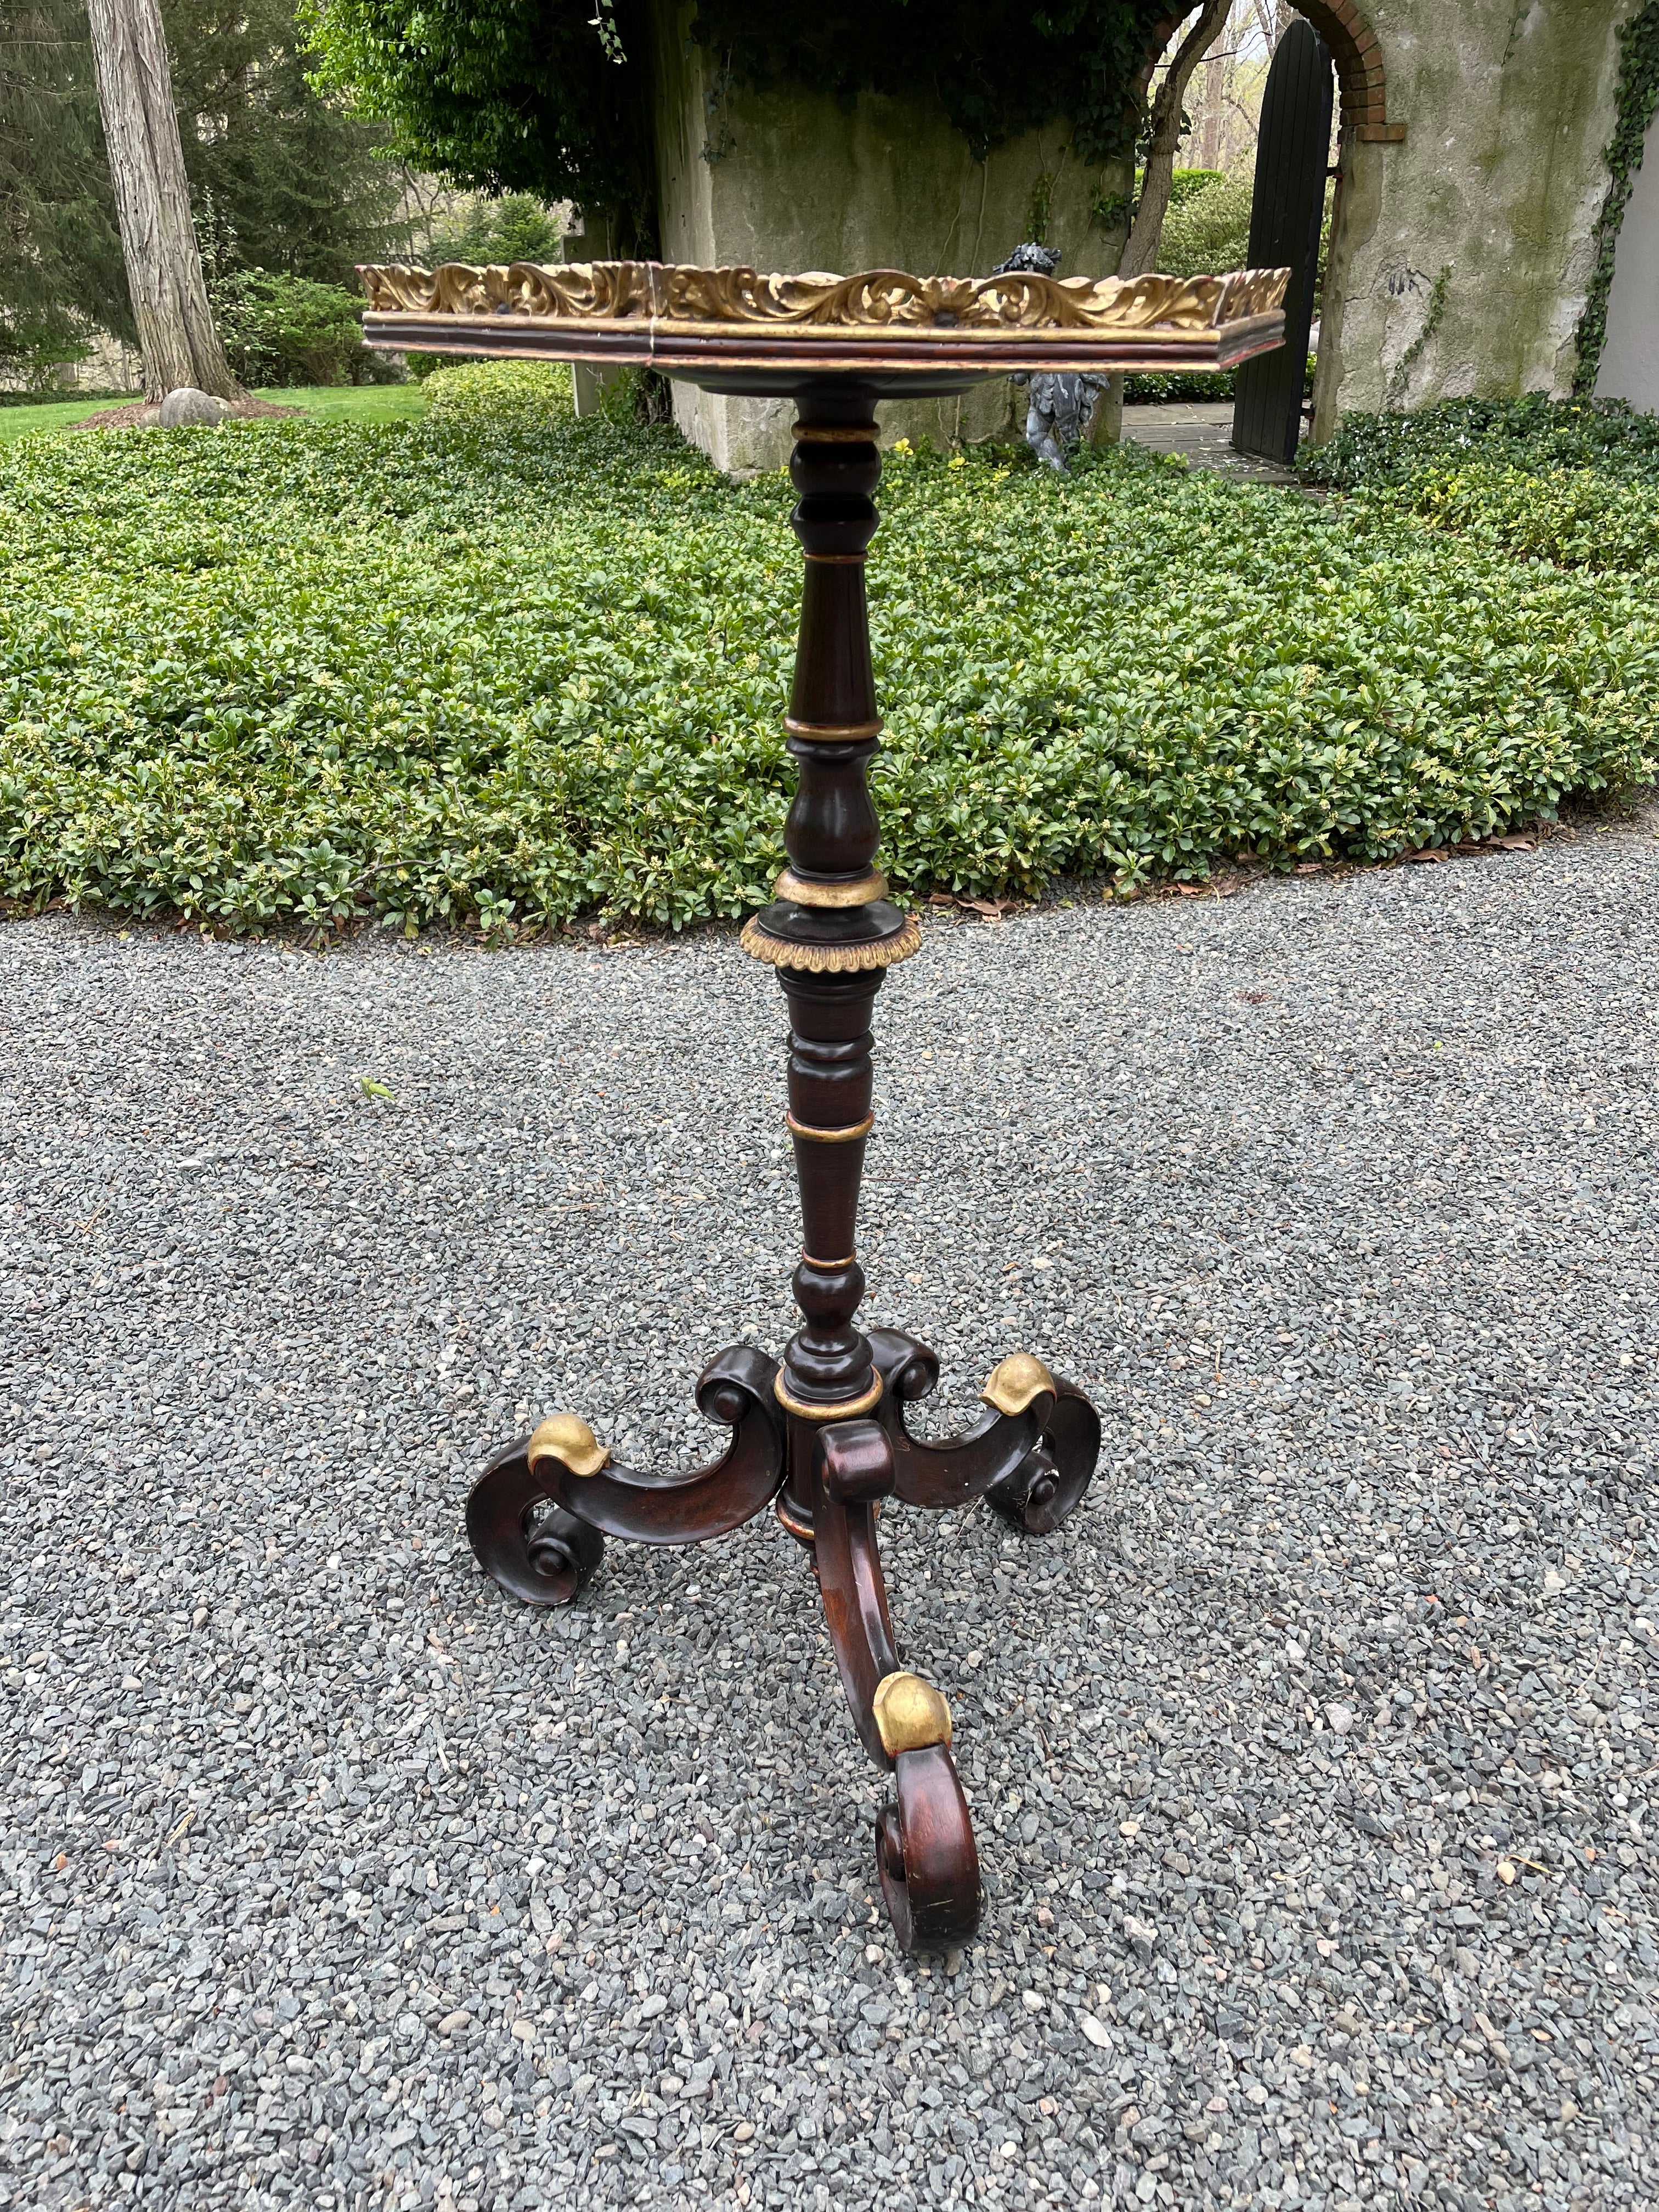 Elegant Italian side table or fern stand in mahogany with elaborate scrolled design base. Portions of the base and the octagonal gallery on top are gilded.